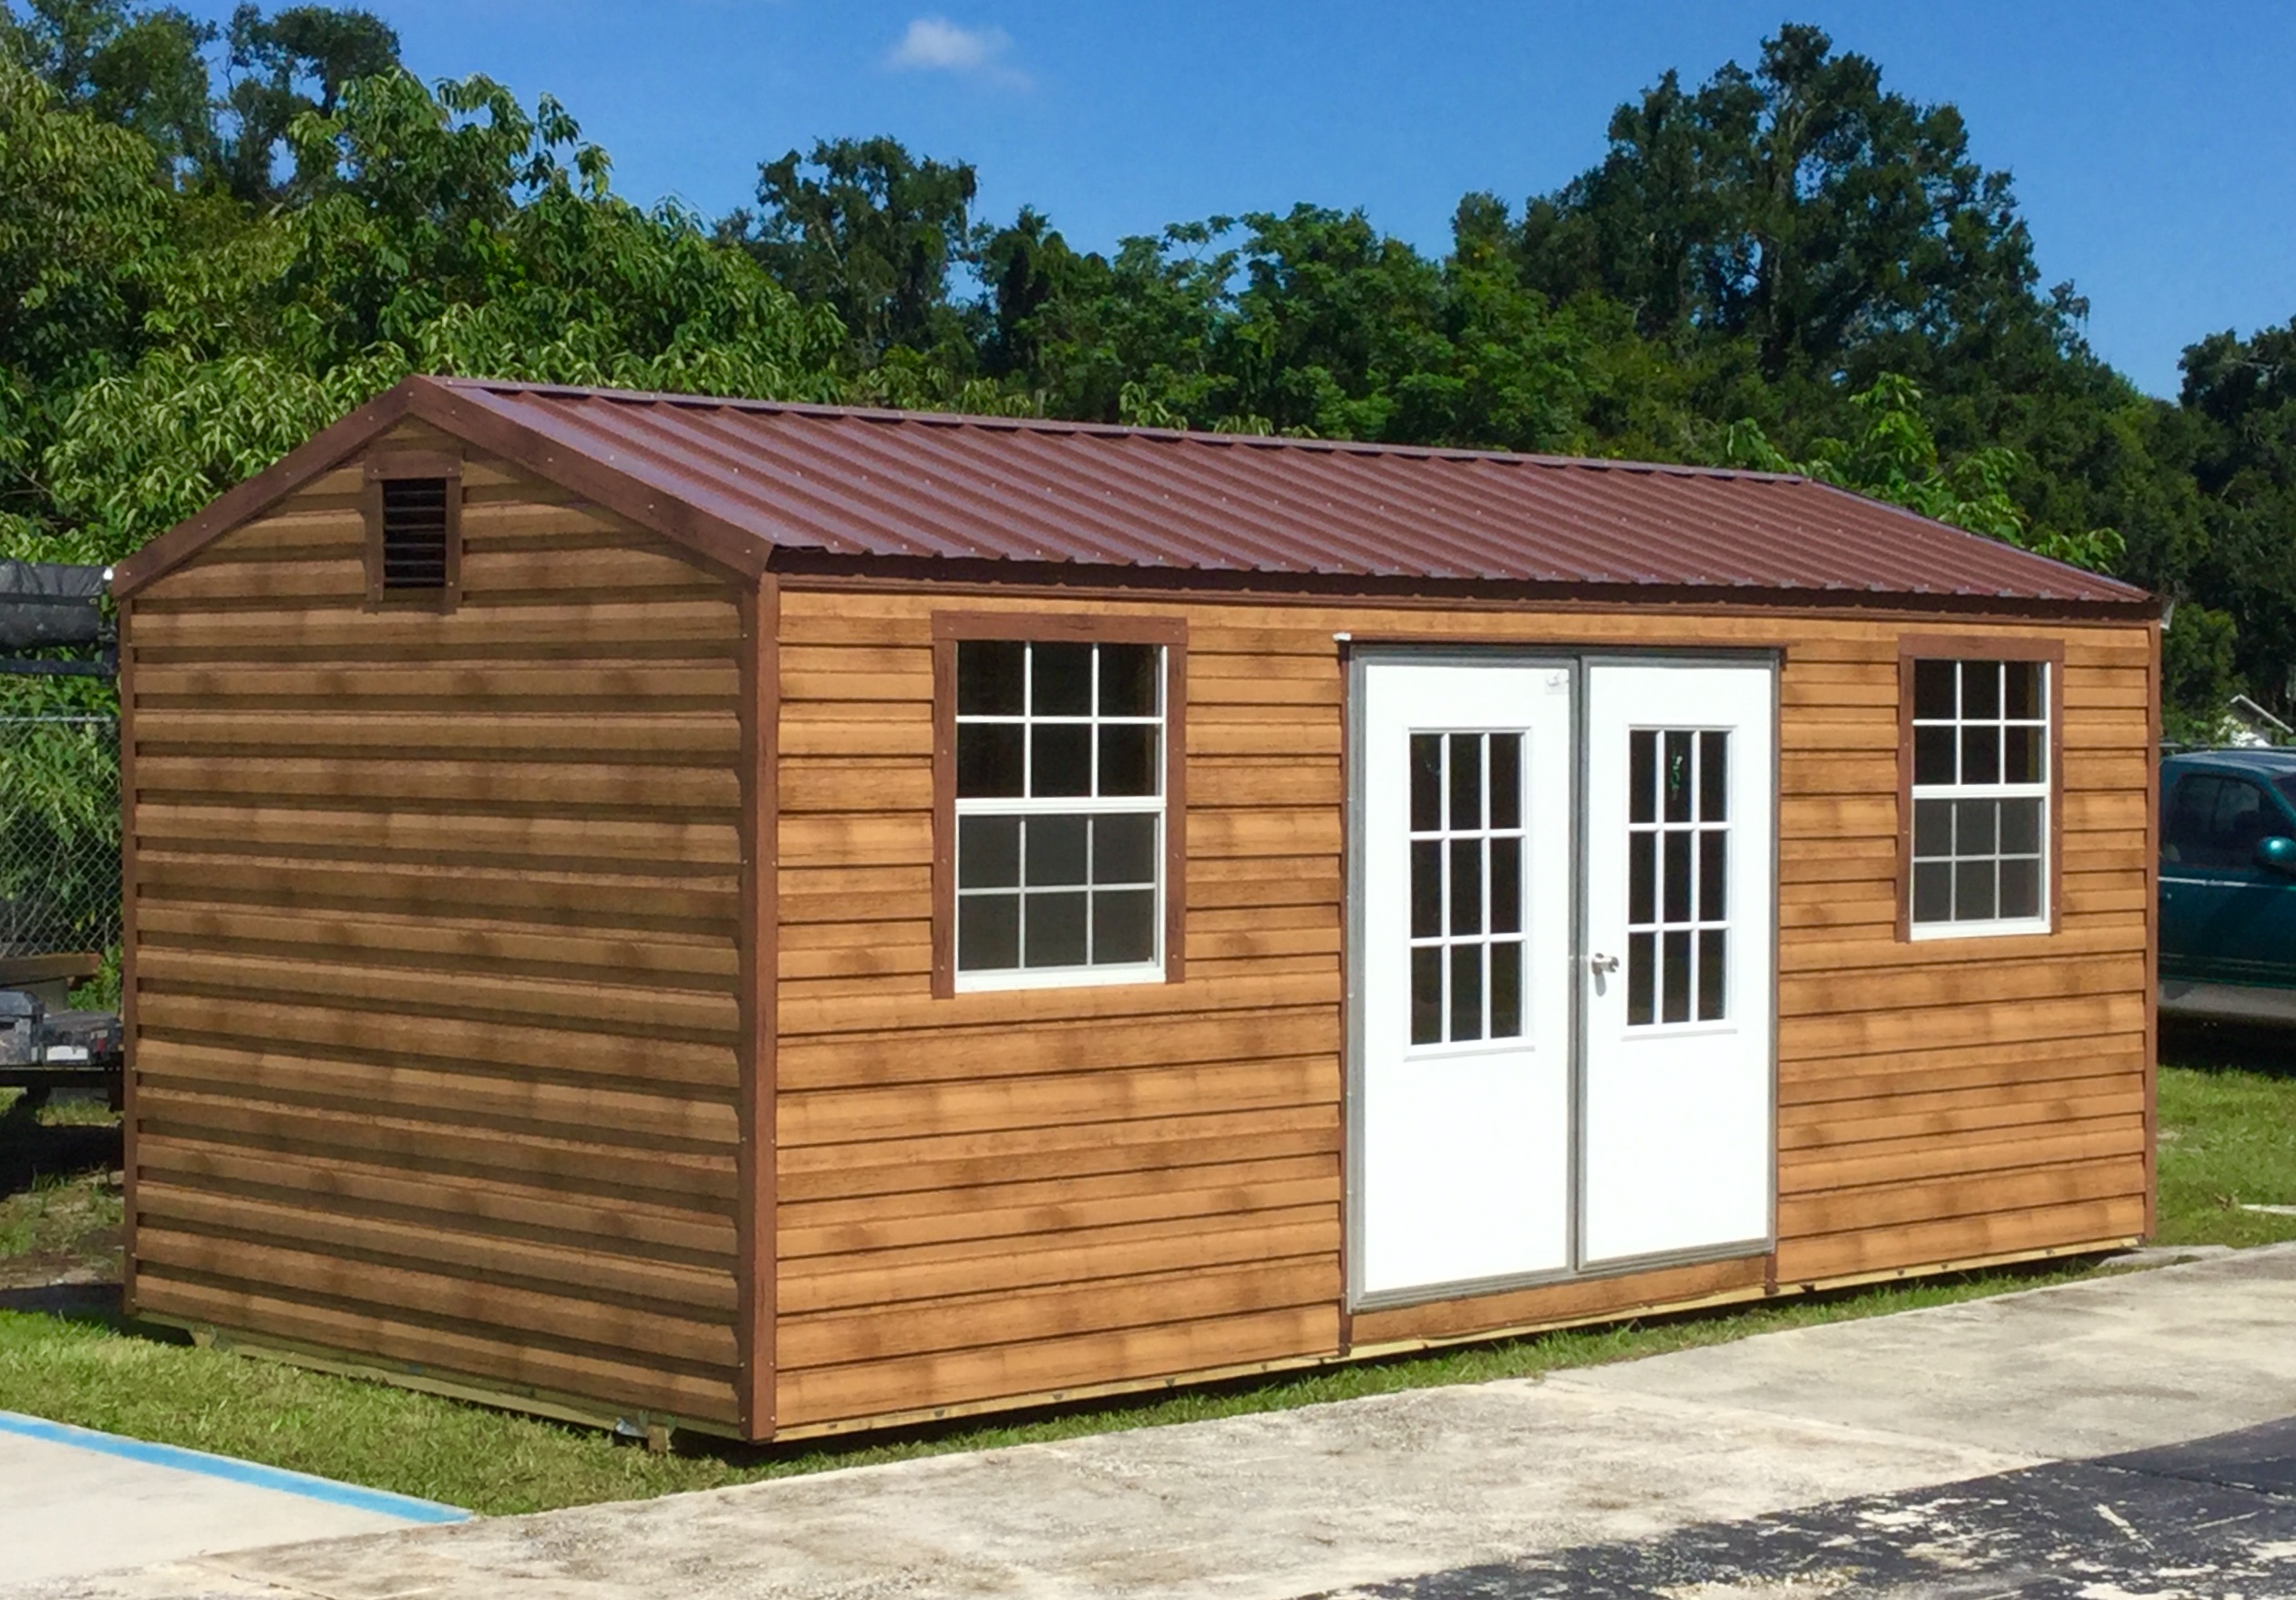 Build Your Custom Shed with A 3D Shed Builder - Shed builders, Custom sheds,  Prefab sheds